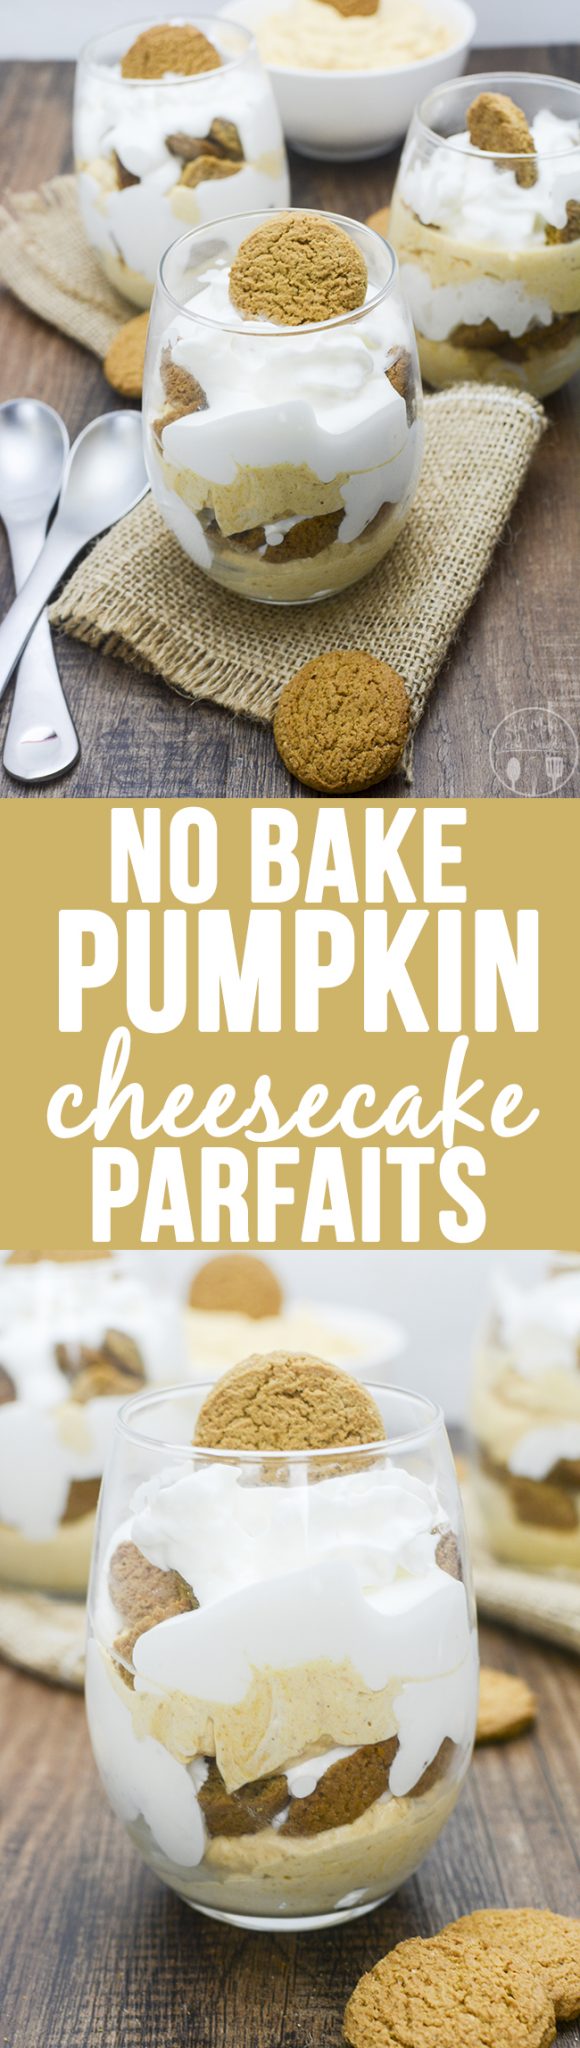 Title card for no bake pumpkin cheesecake parfaits with text.